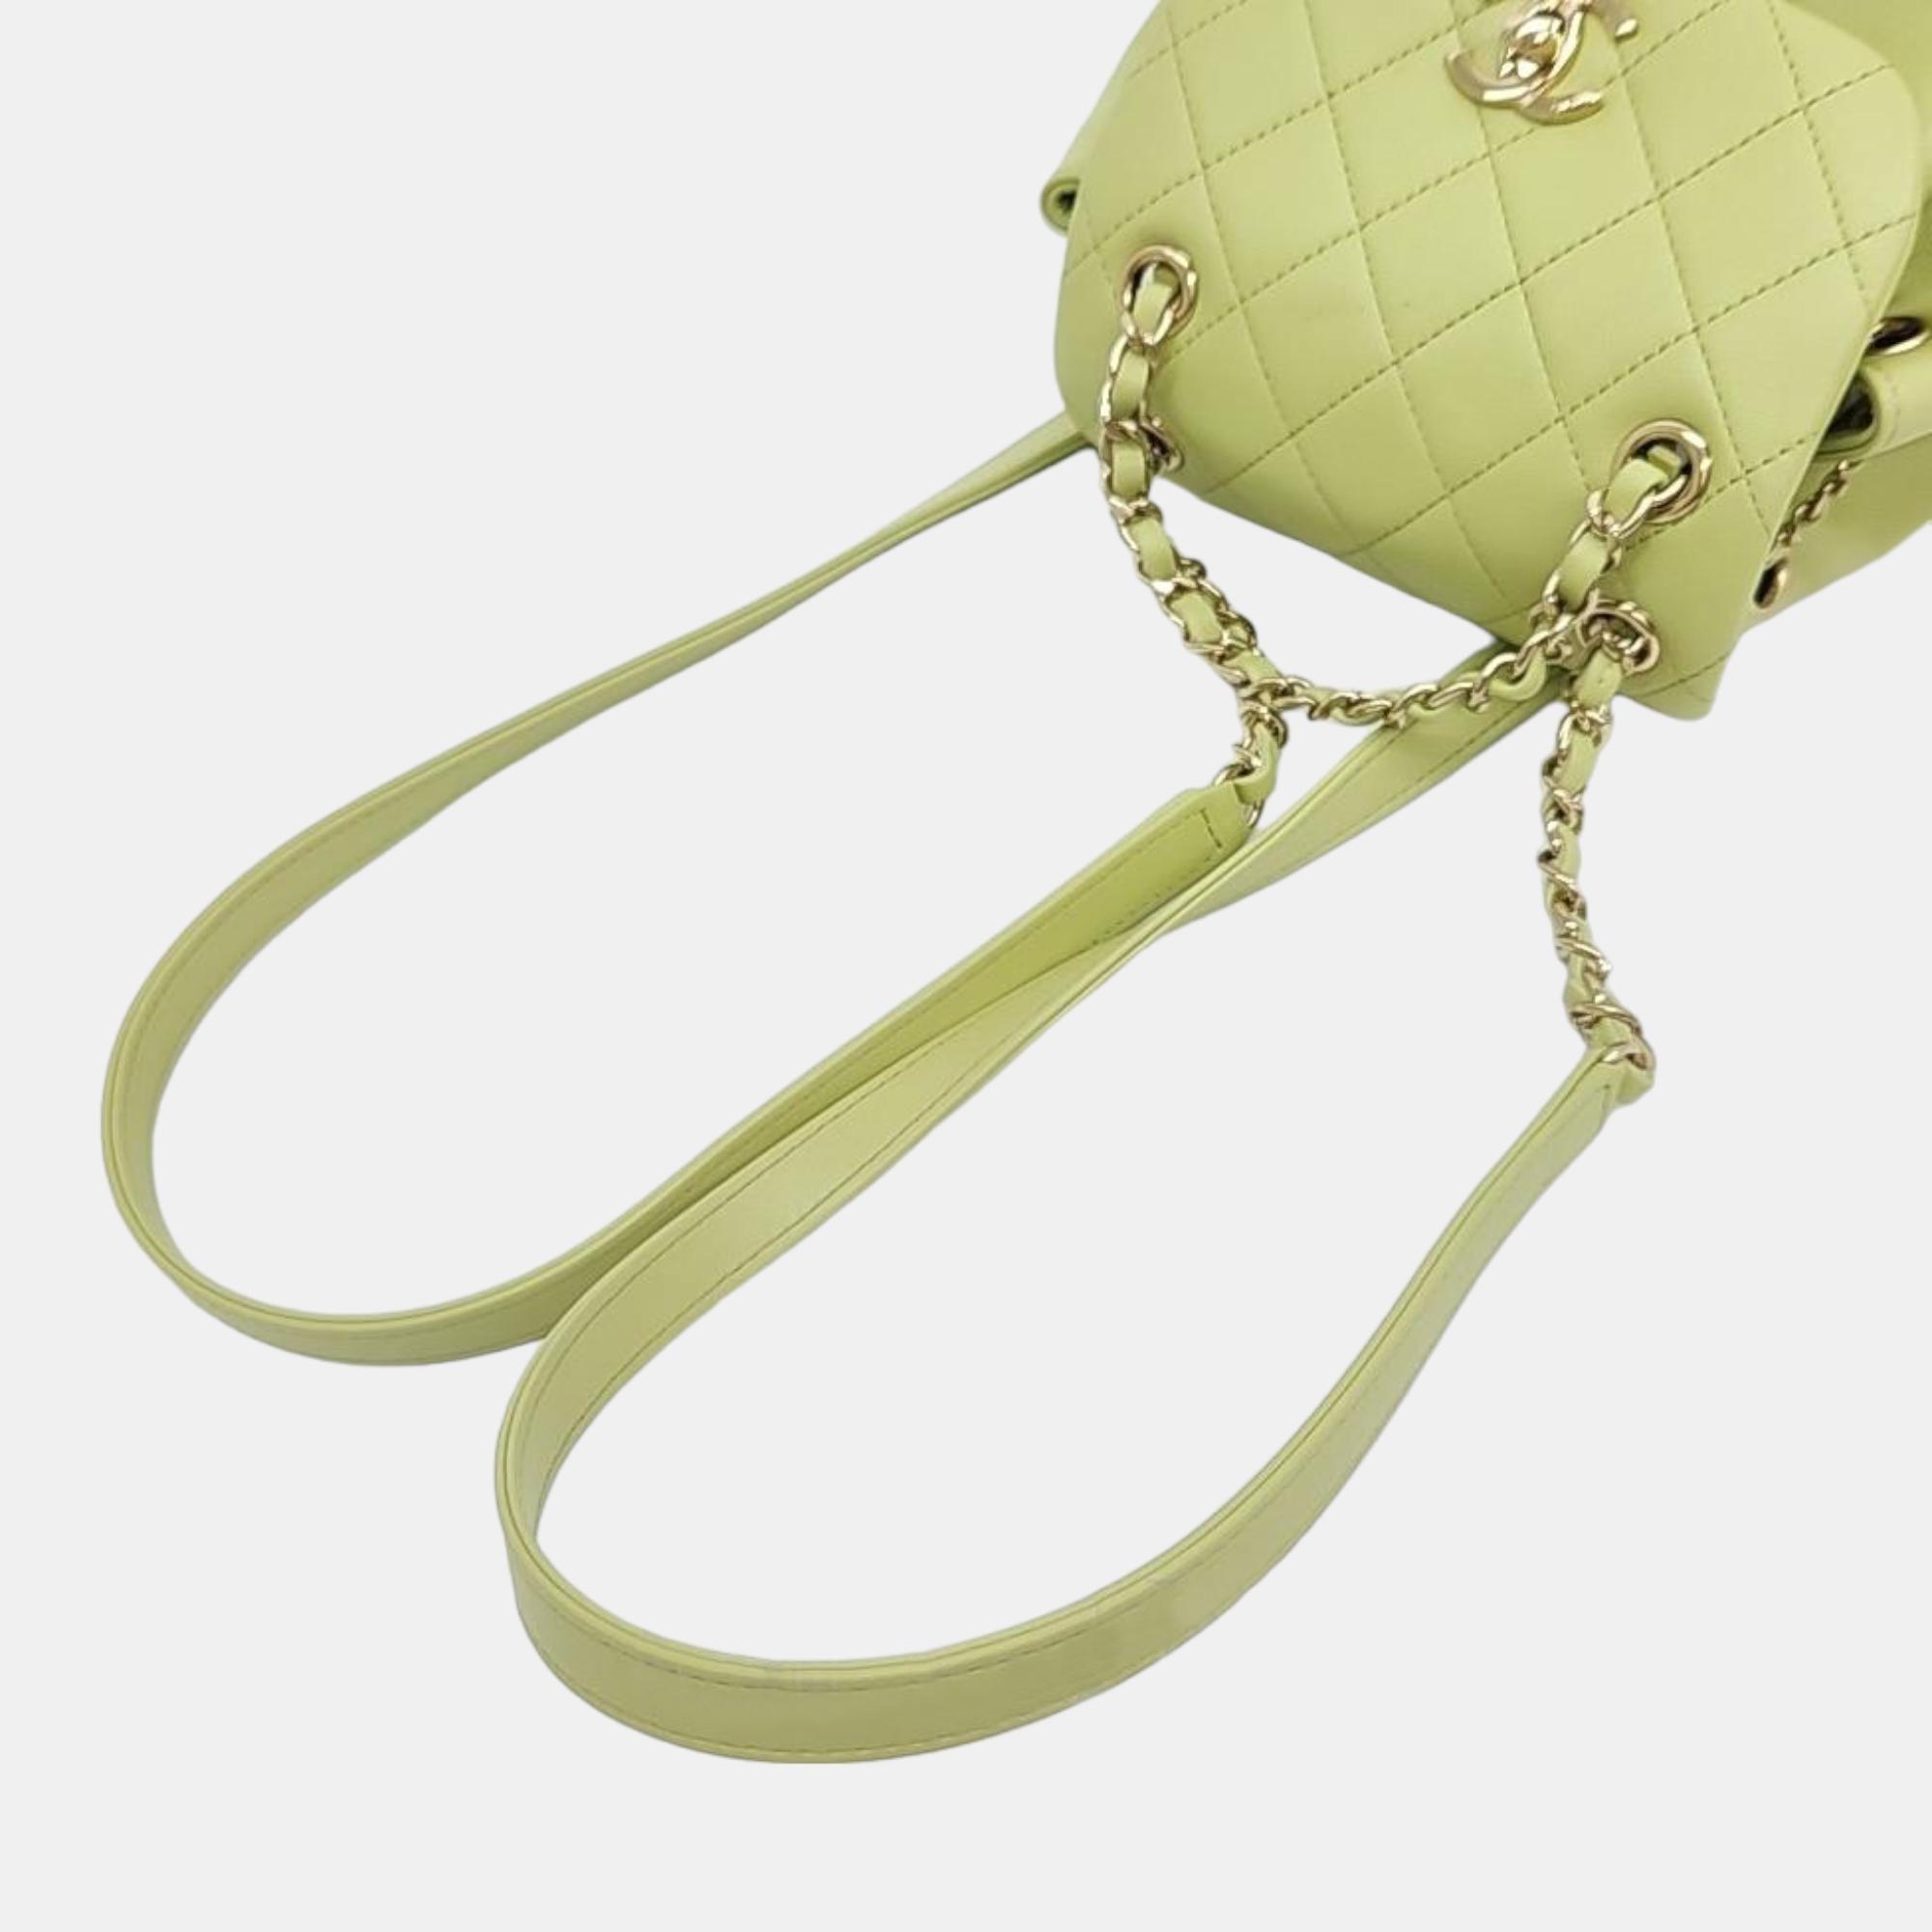 Chanel Green Leather Small Duma Backpack